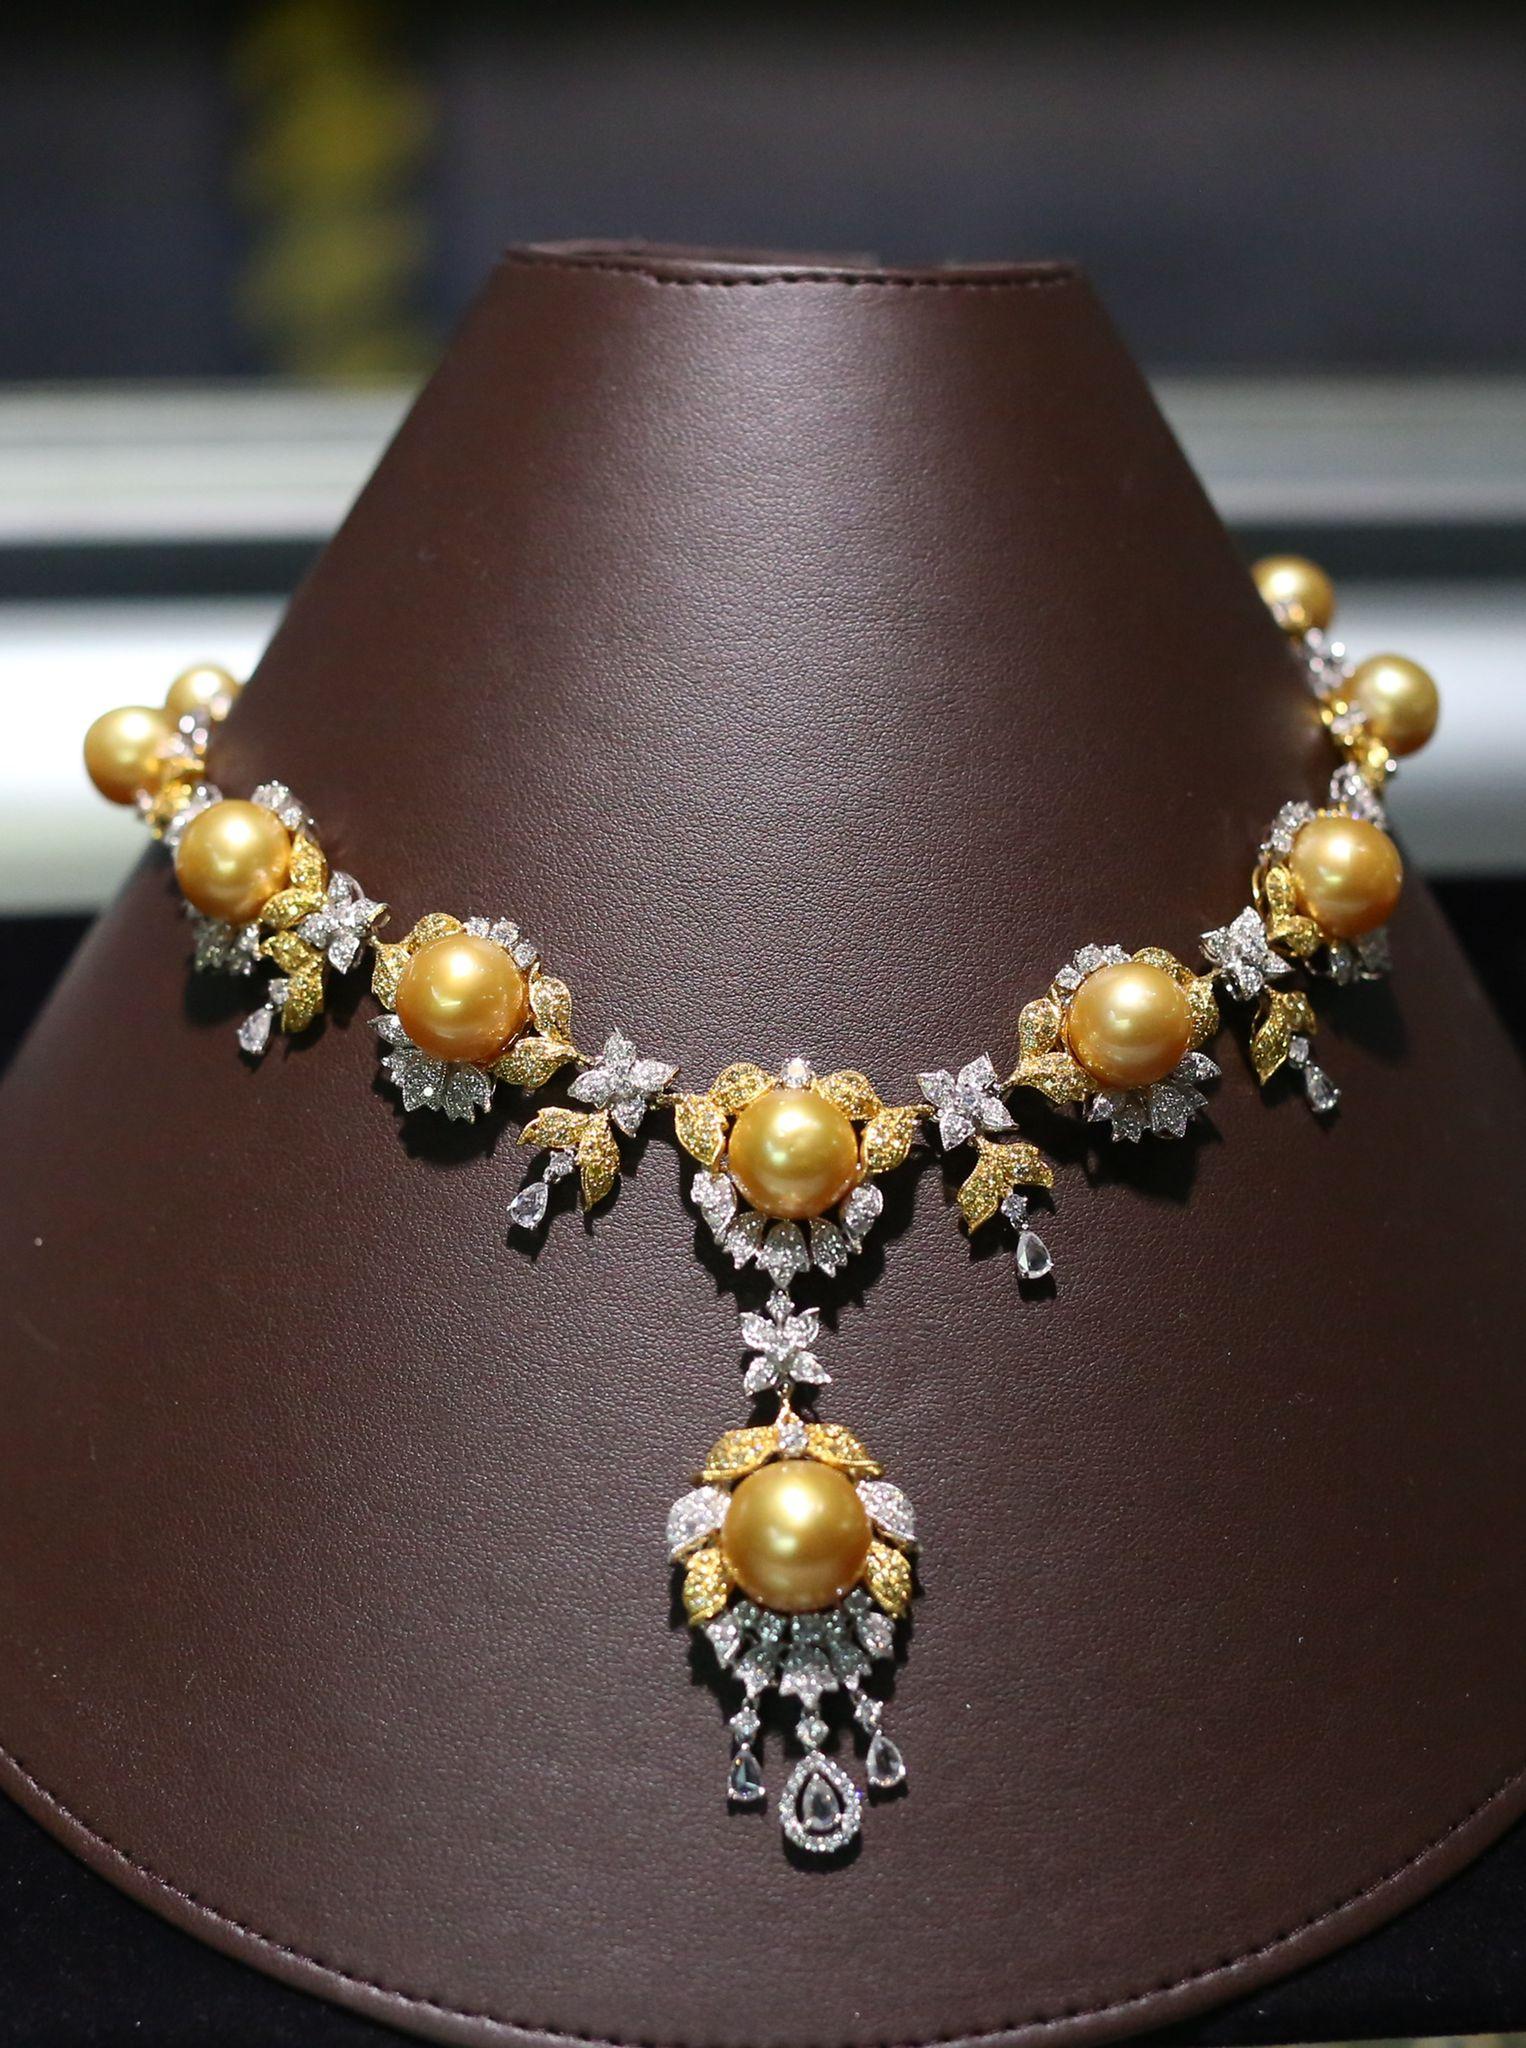 Mixed Cut NWT $99, 000 Gorgeous 18KT South Sea Golden Pearl Fancy Yellow Diamond Necklace For Sale